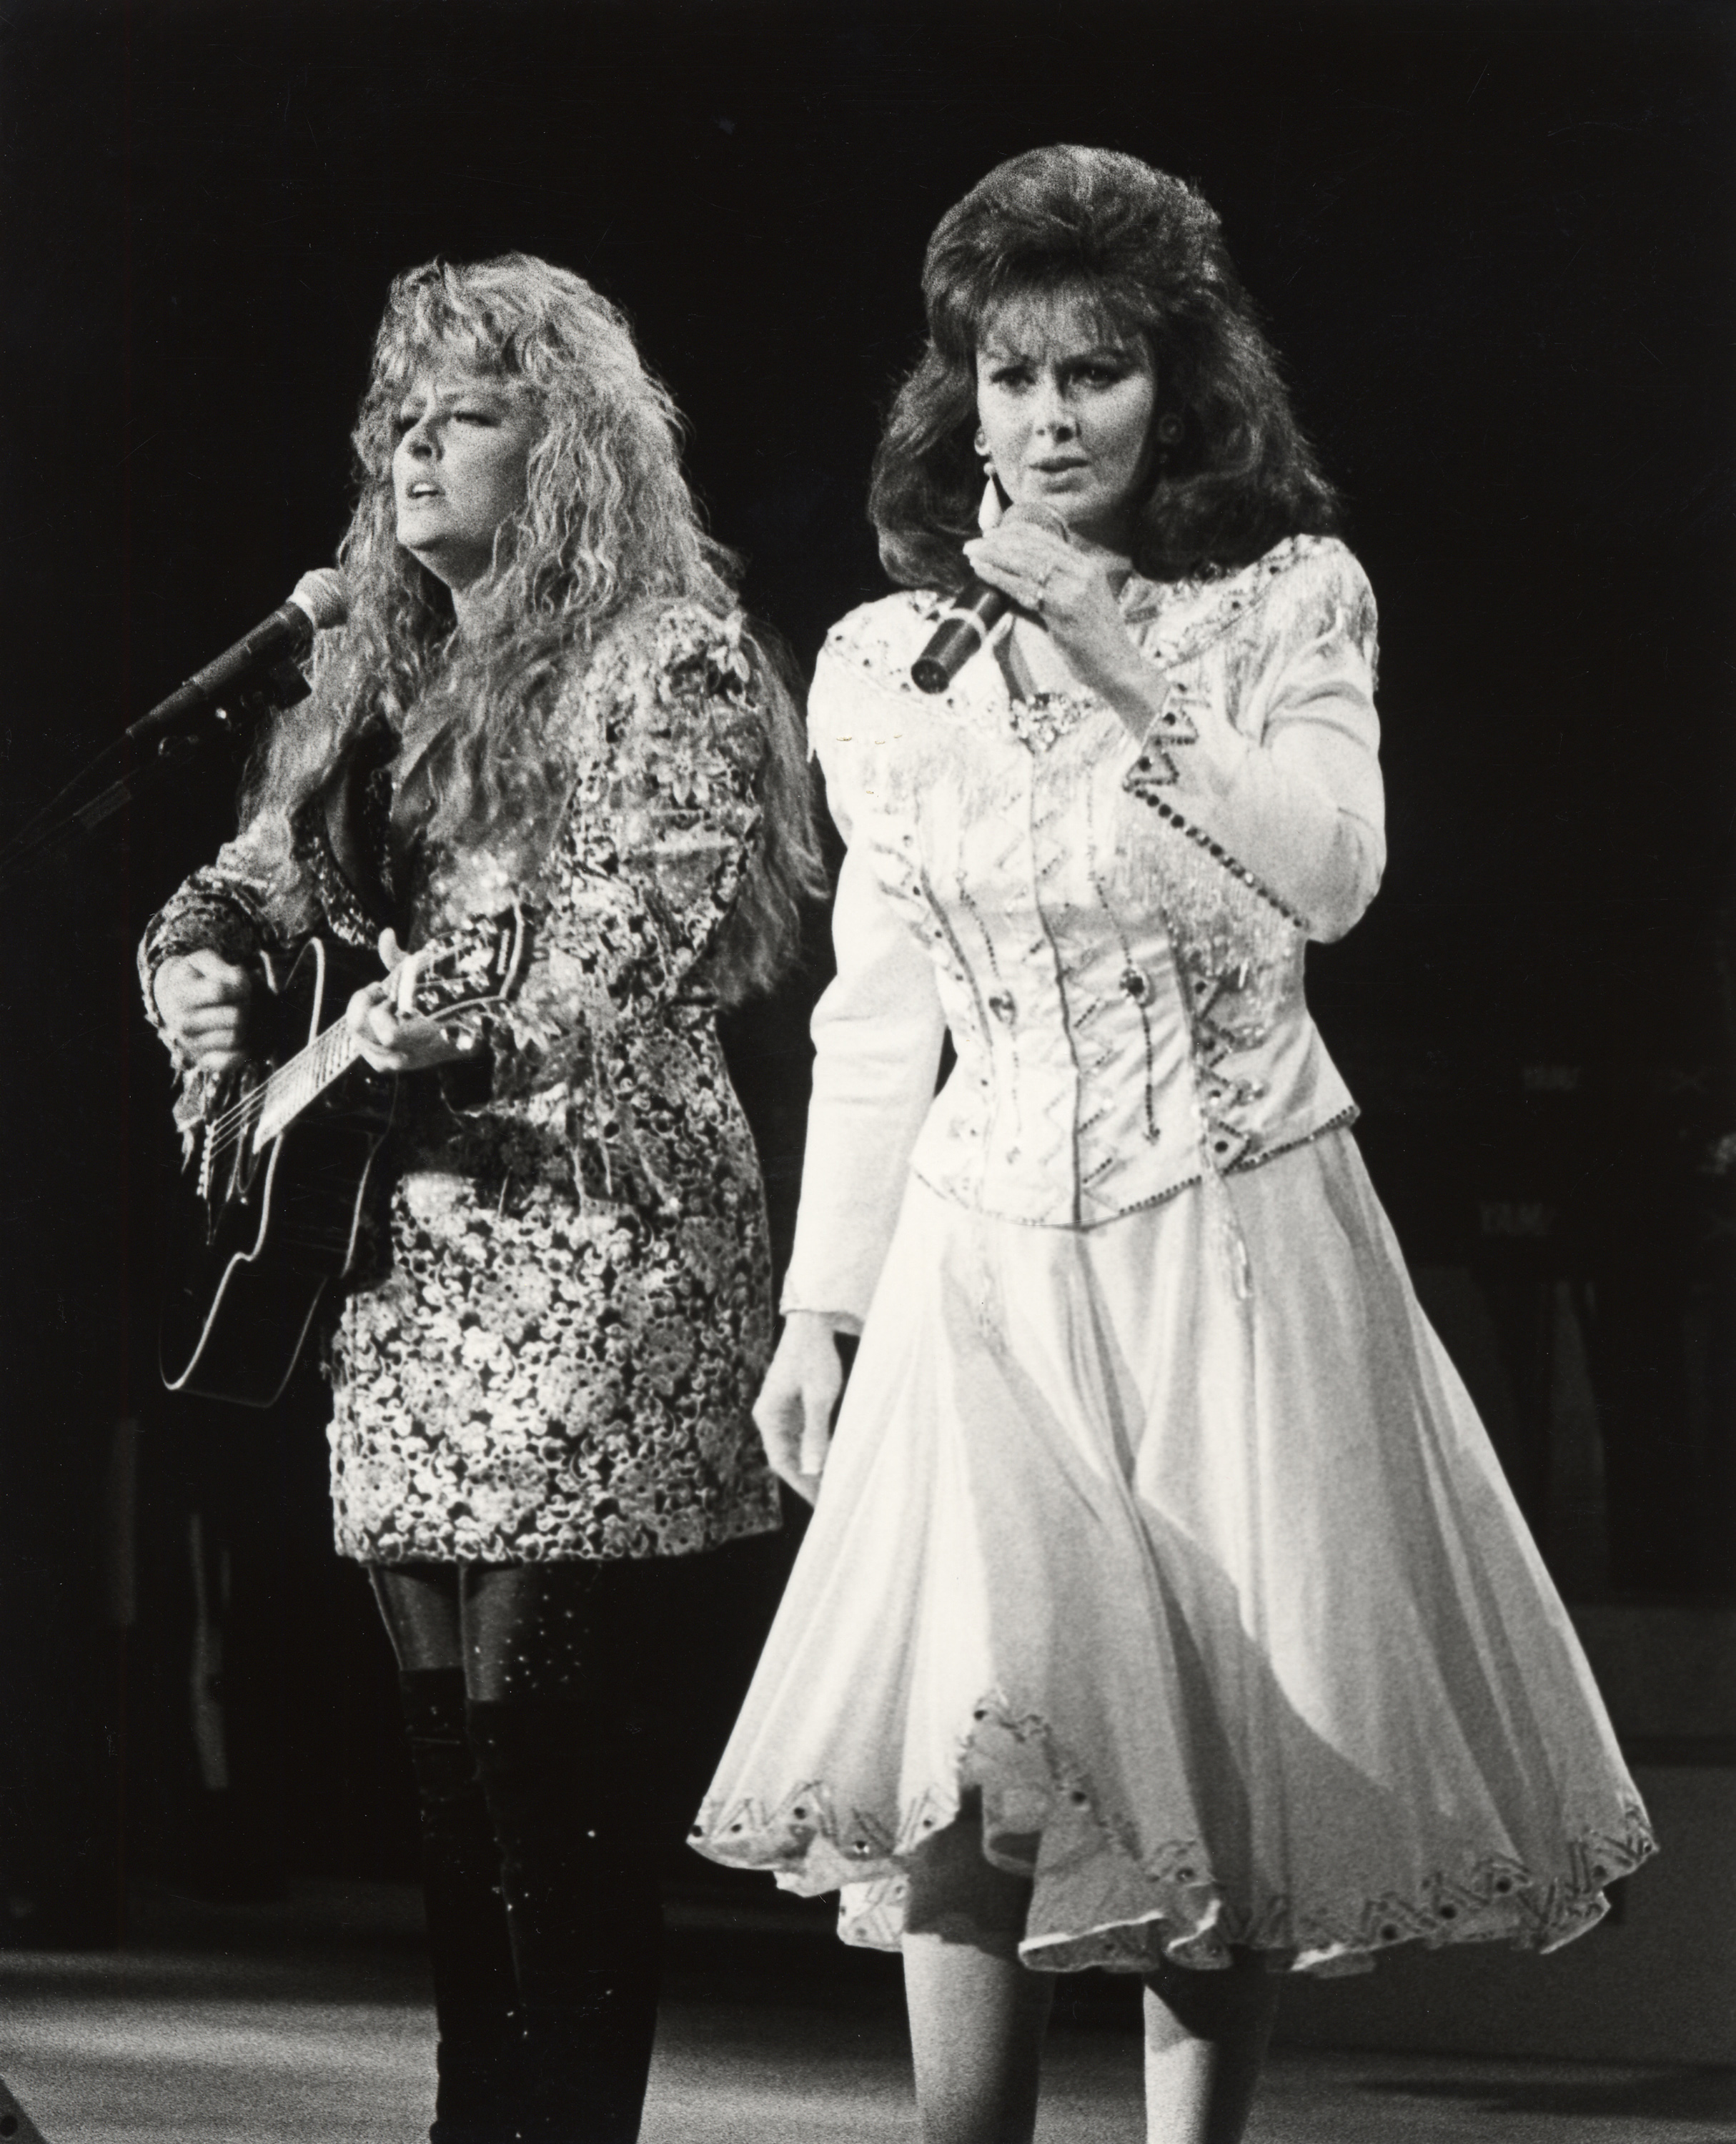 The girl and her mom performing at a concert in Orange County, California, on June 23, 1991 | Source: Getty Images